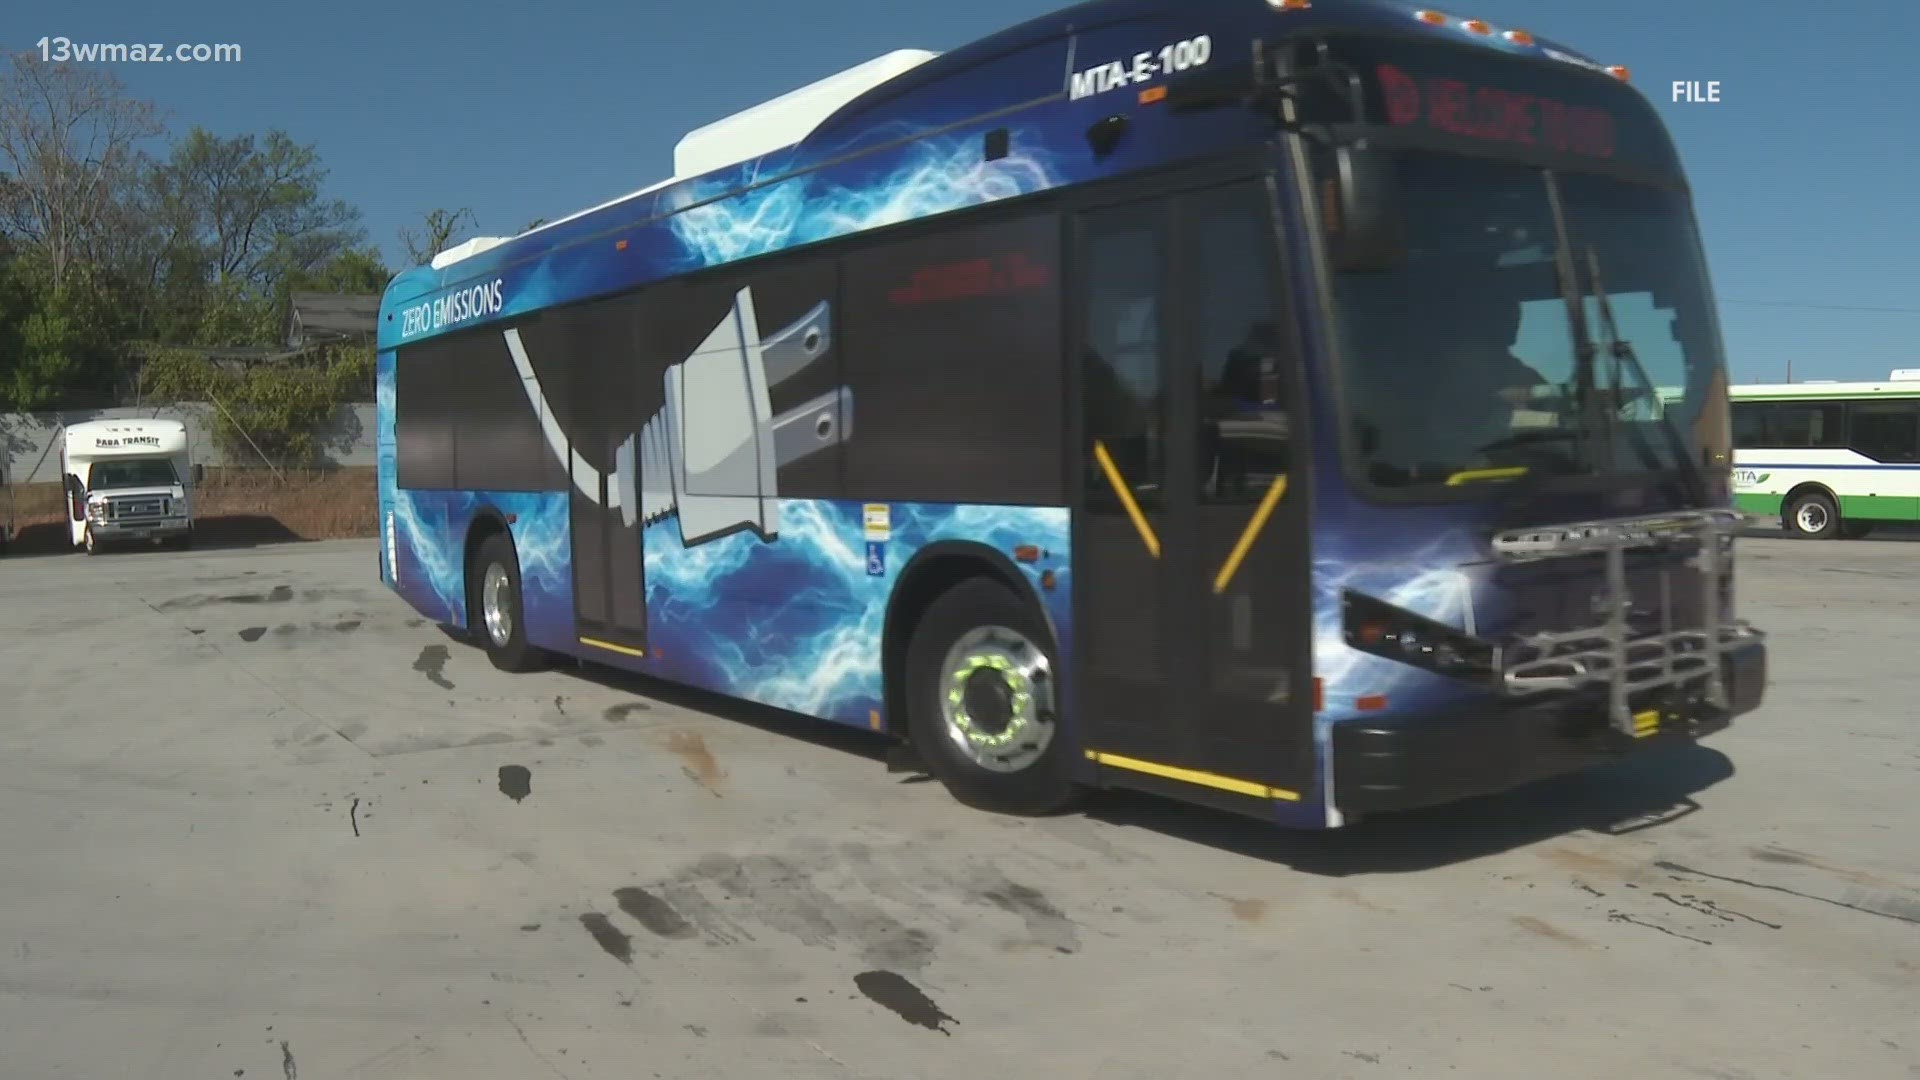 The transit authority says each electric bus costs around $900,000 to make.